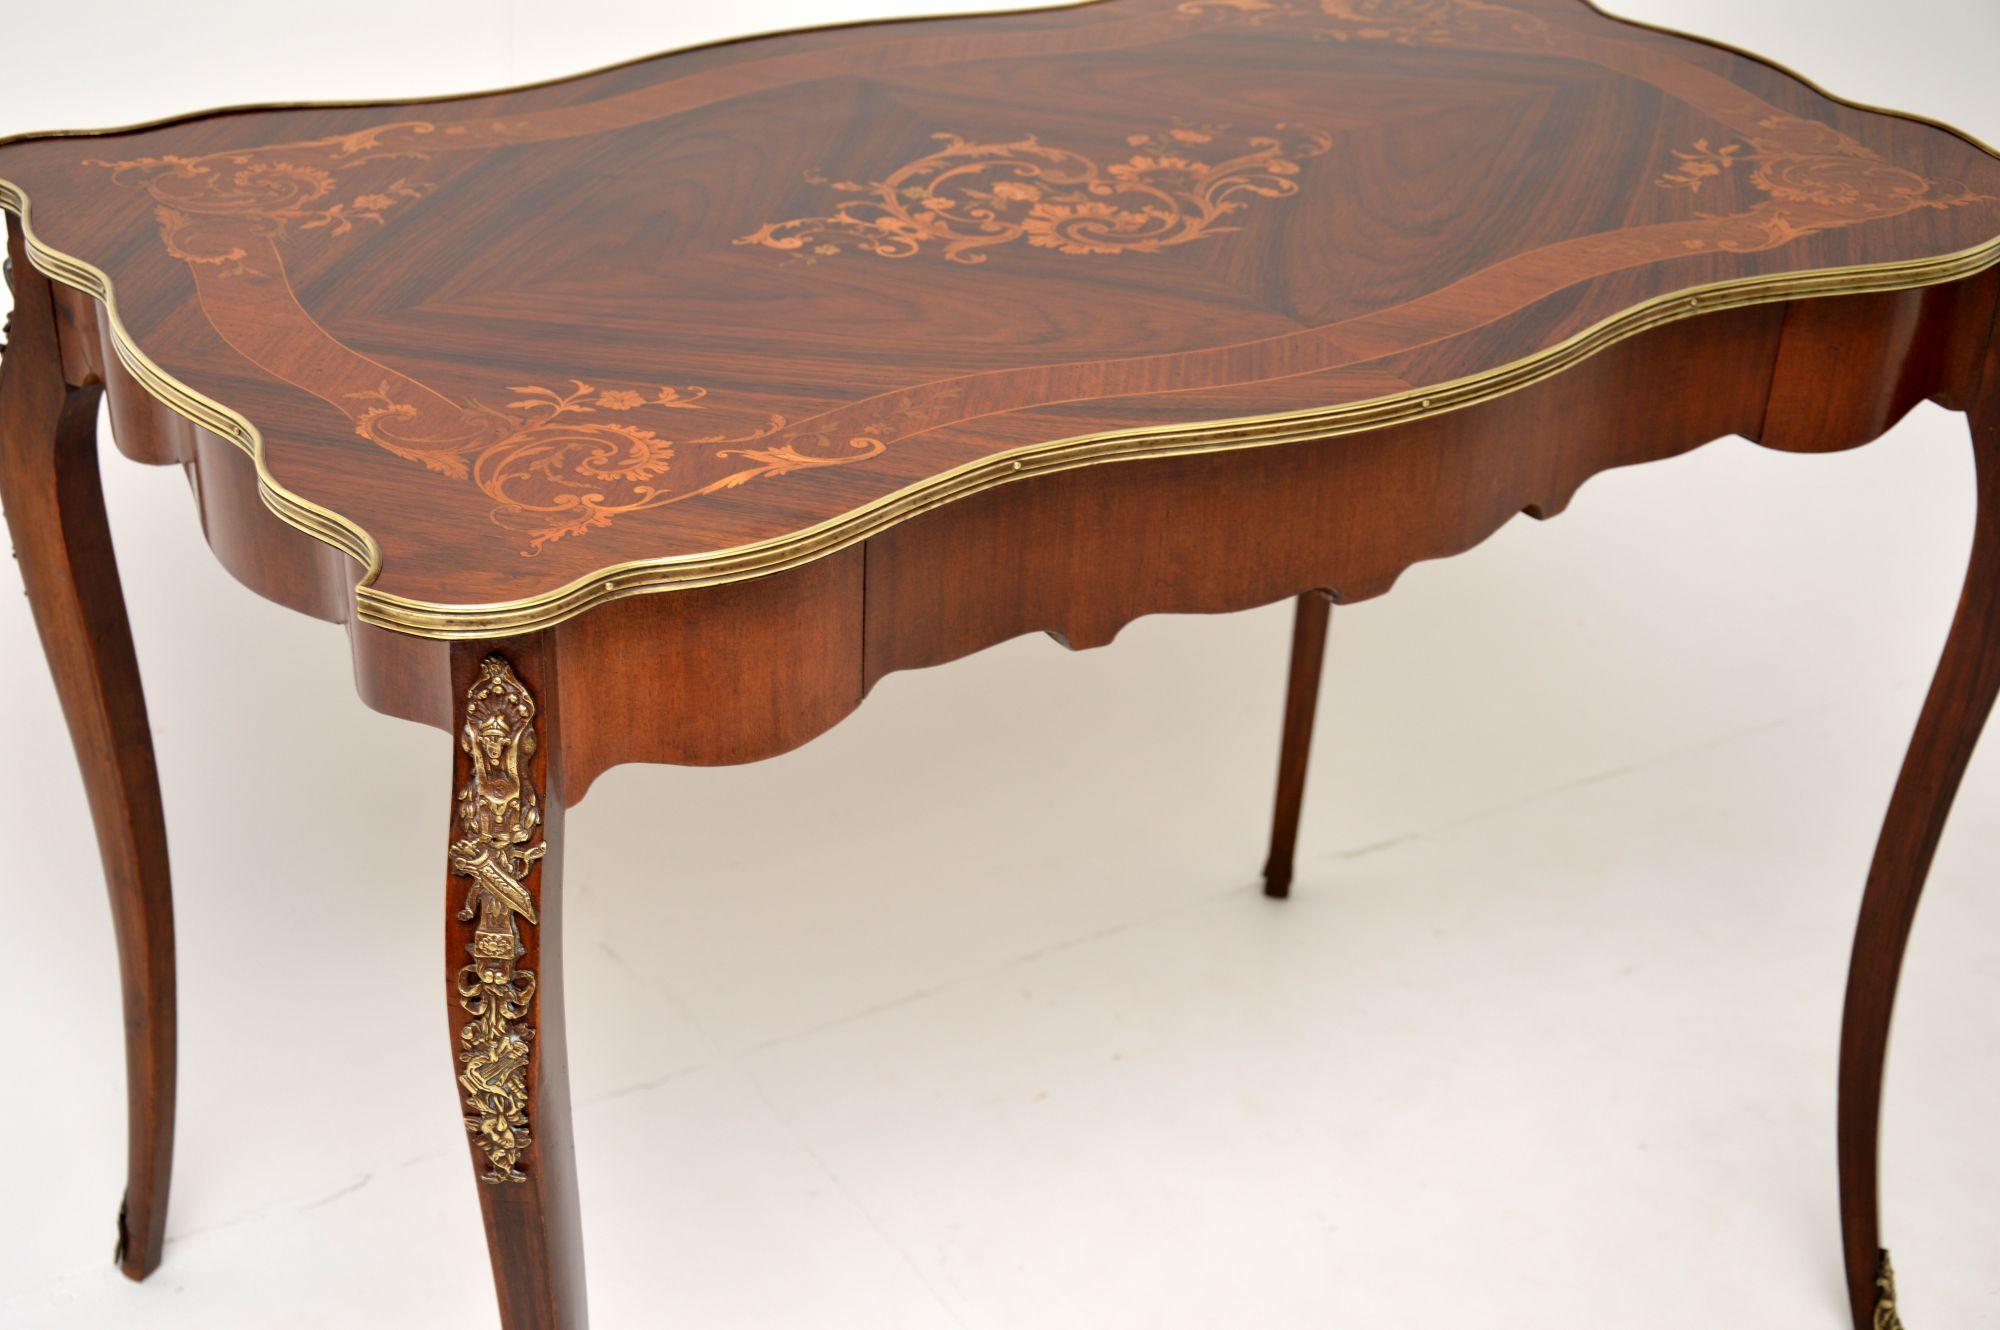 Antique French Inlaid Marquetry Writing Table / Desk 1